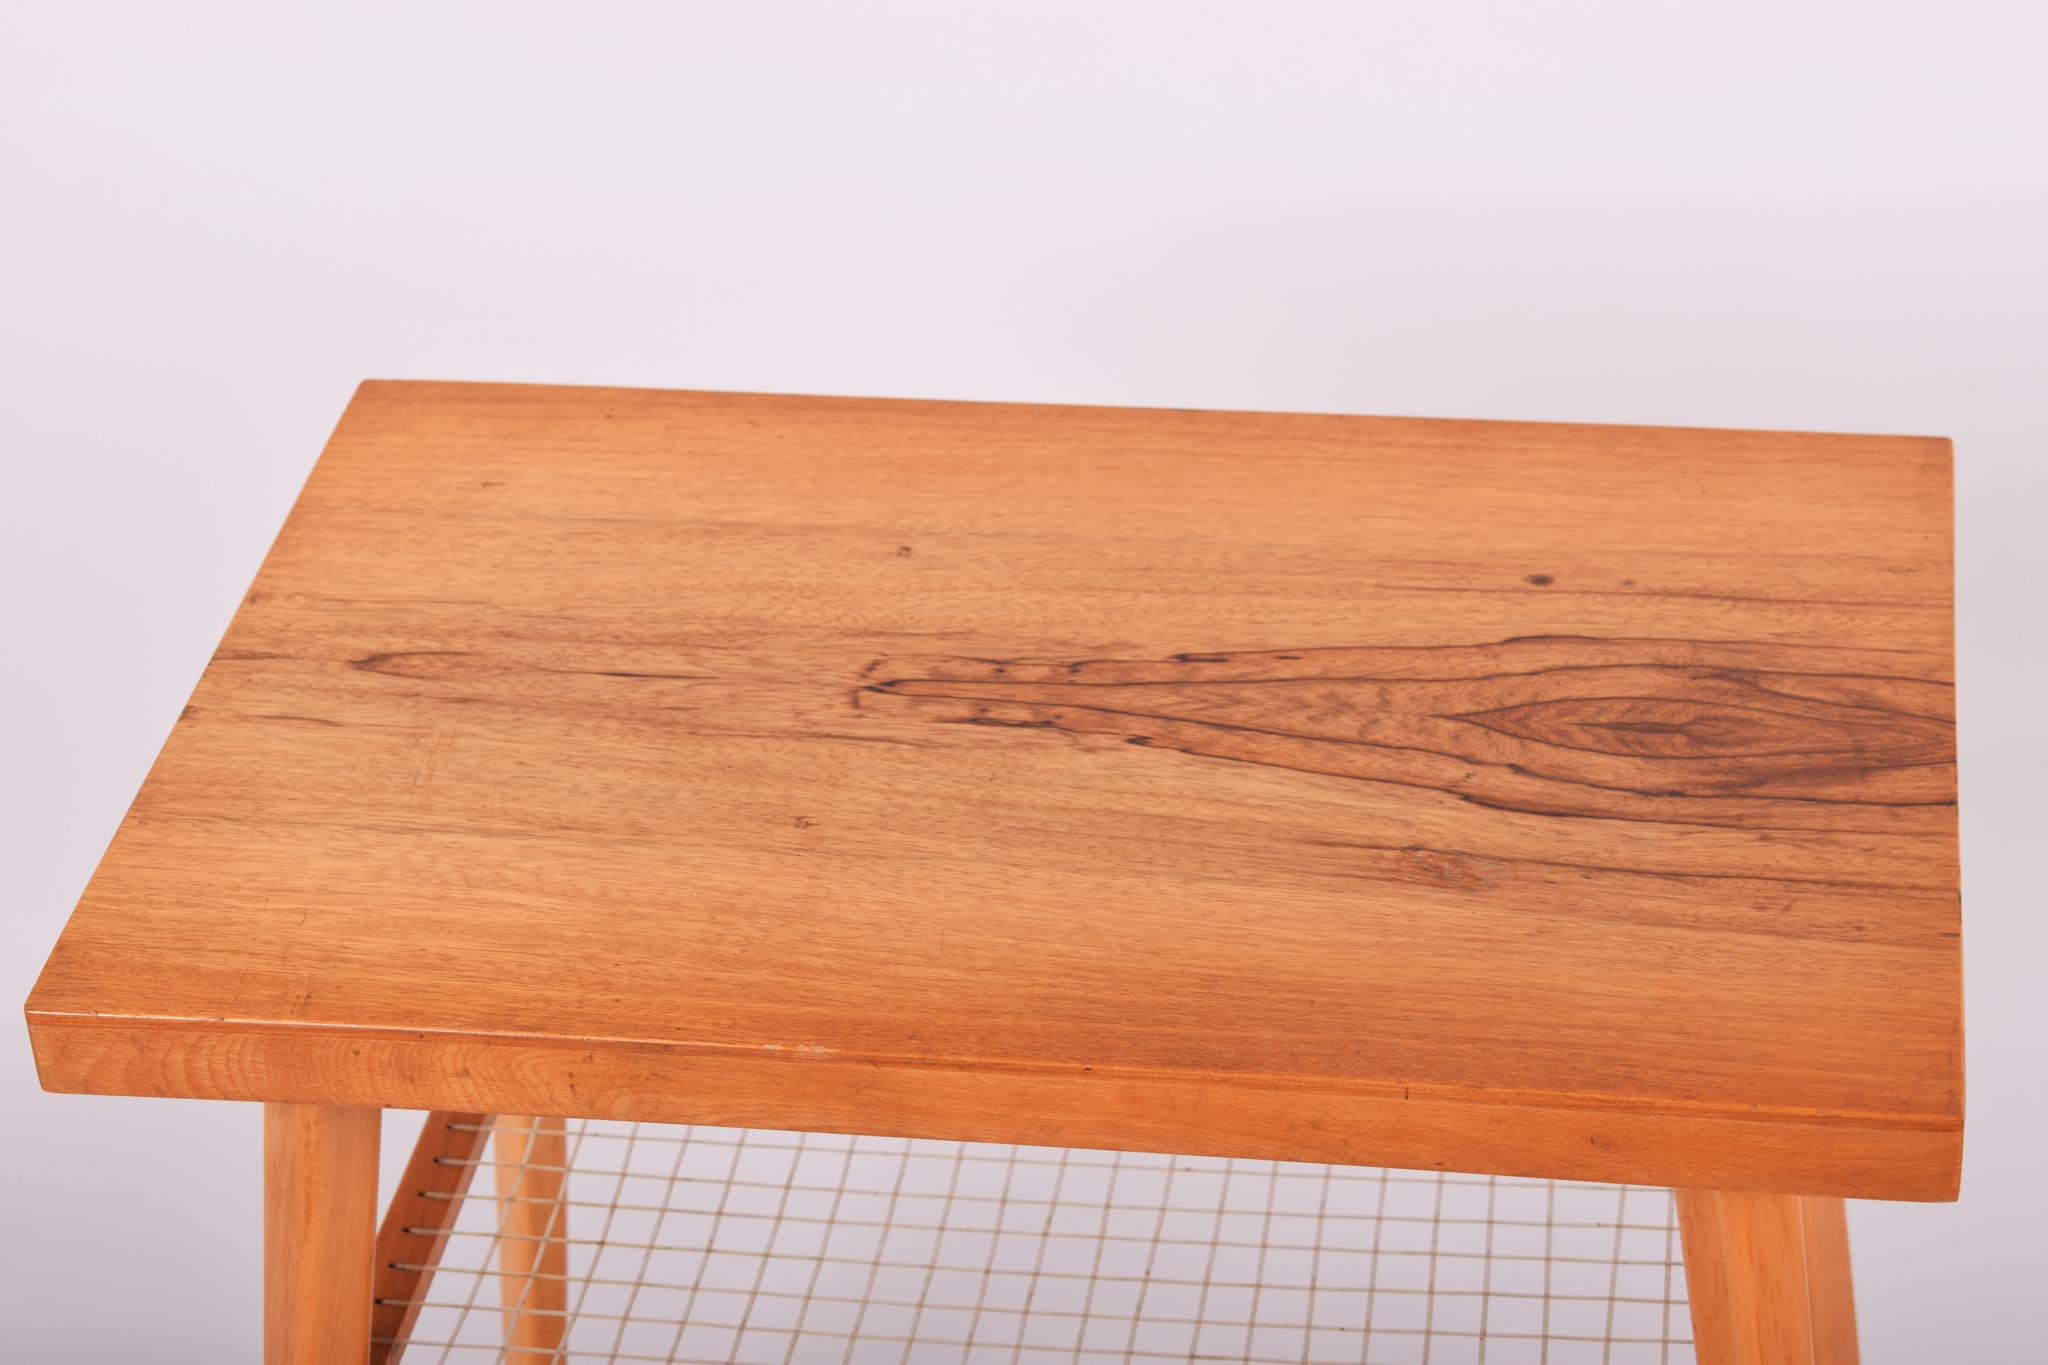 Small table.
Czech midcentury
Material: Beech
Period: 1950-1959.